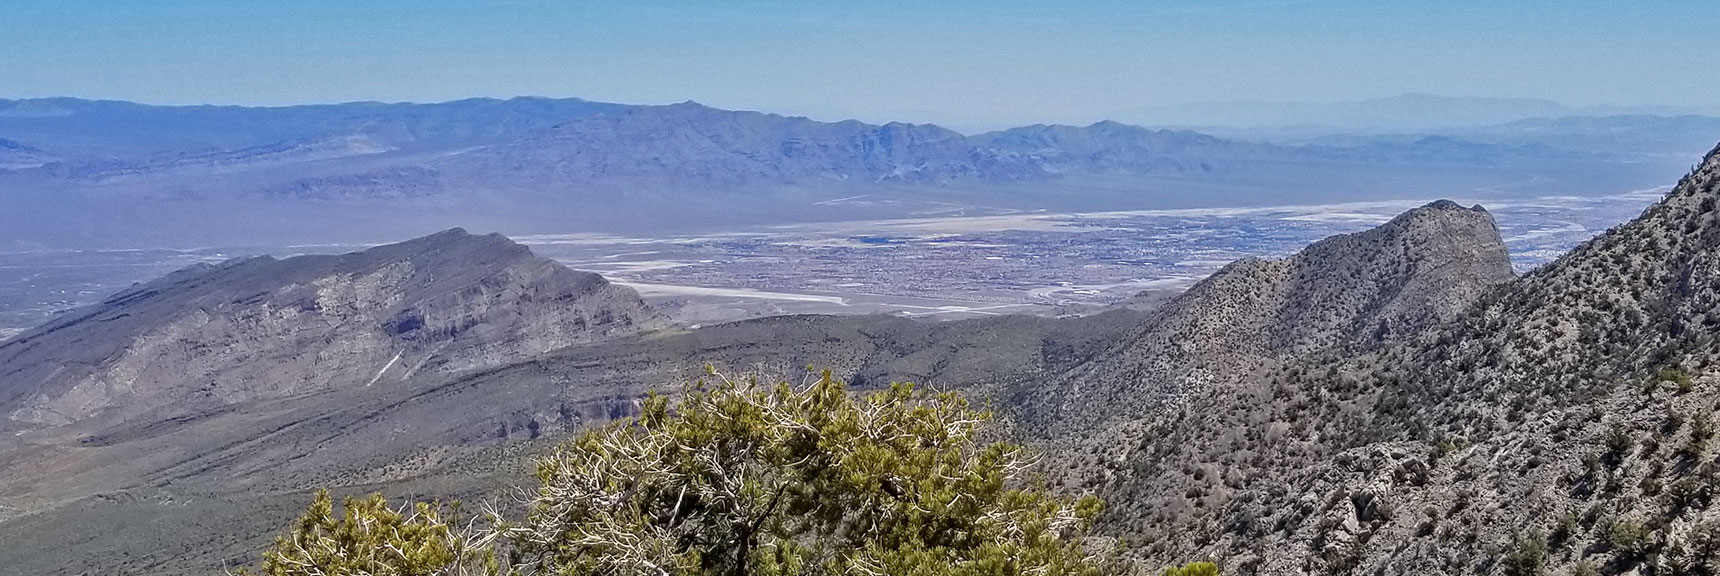 Gass Peak and Centennial Hills Viewed from the 7400ft High Point on the La Madre Mountain Nevada Northern Approach